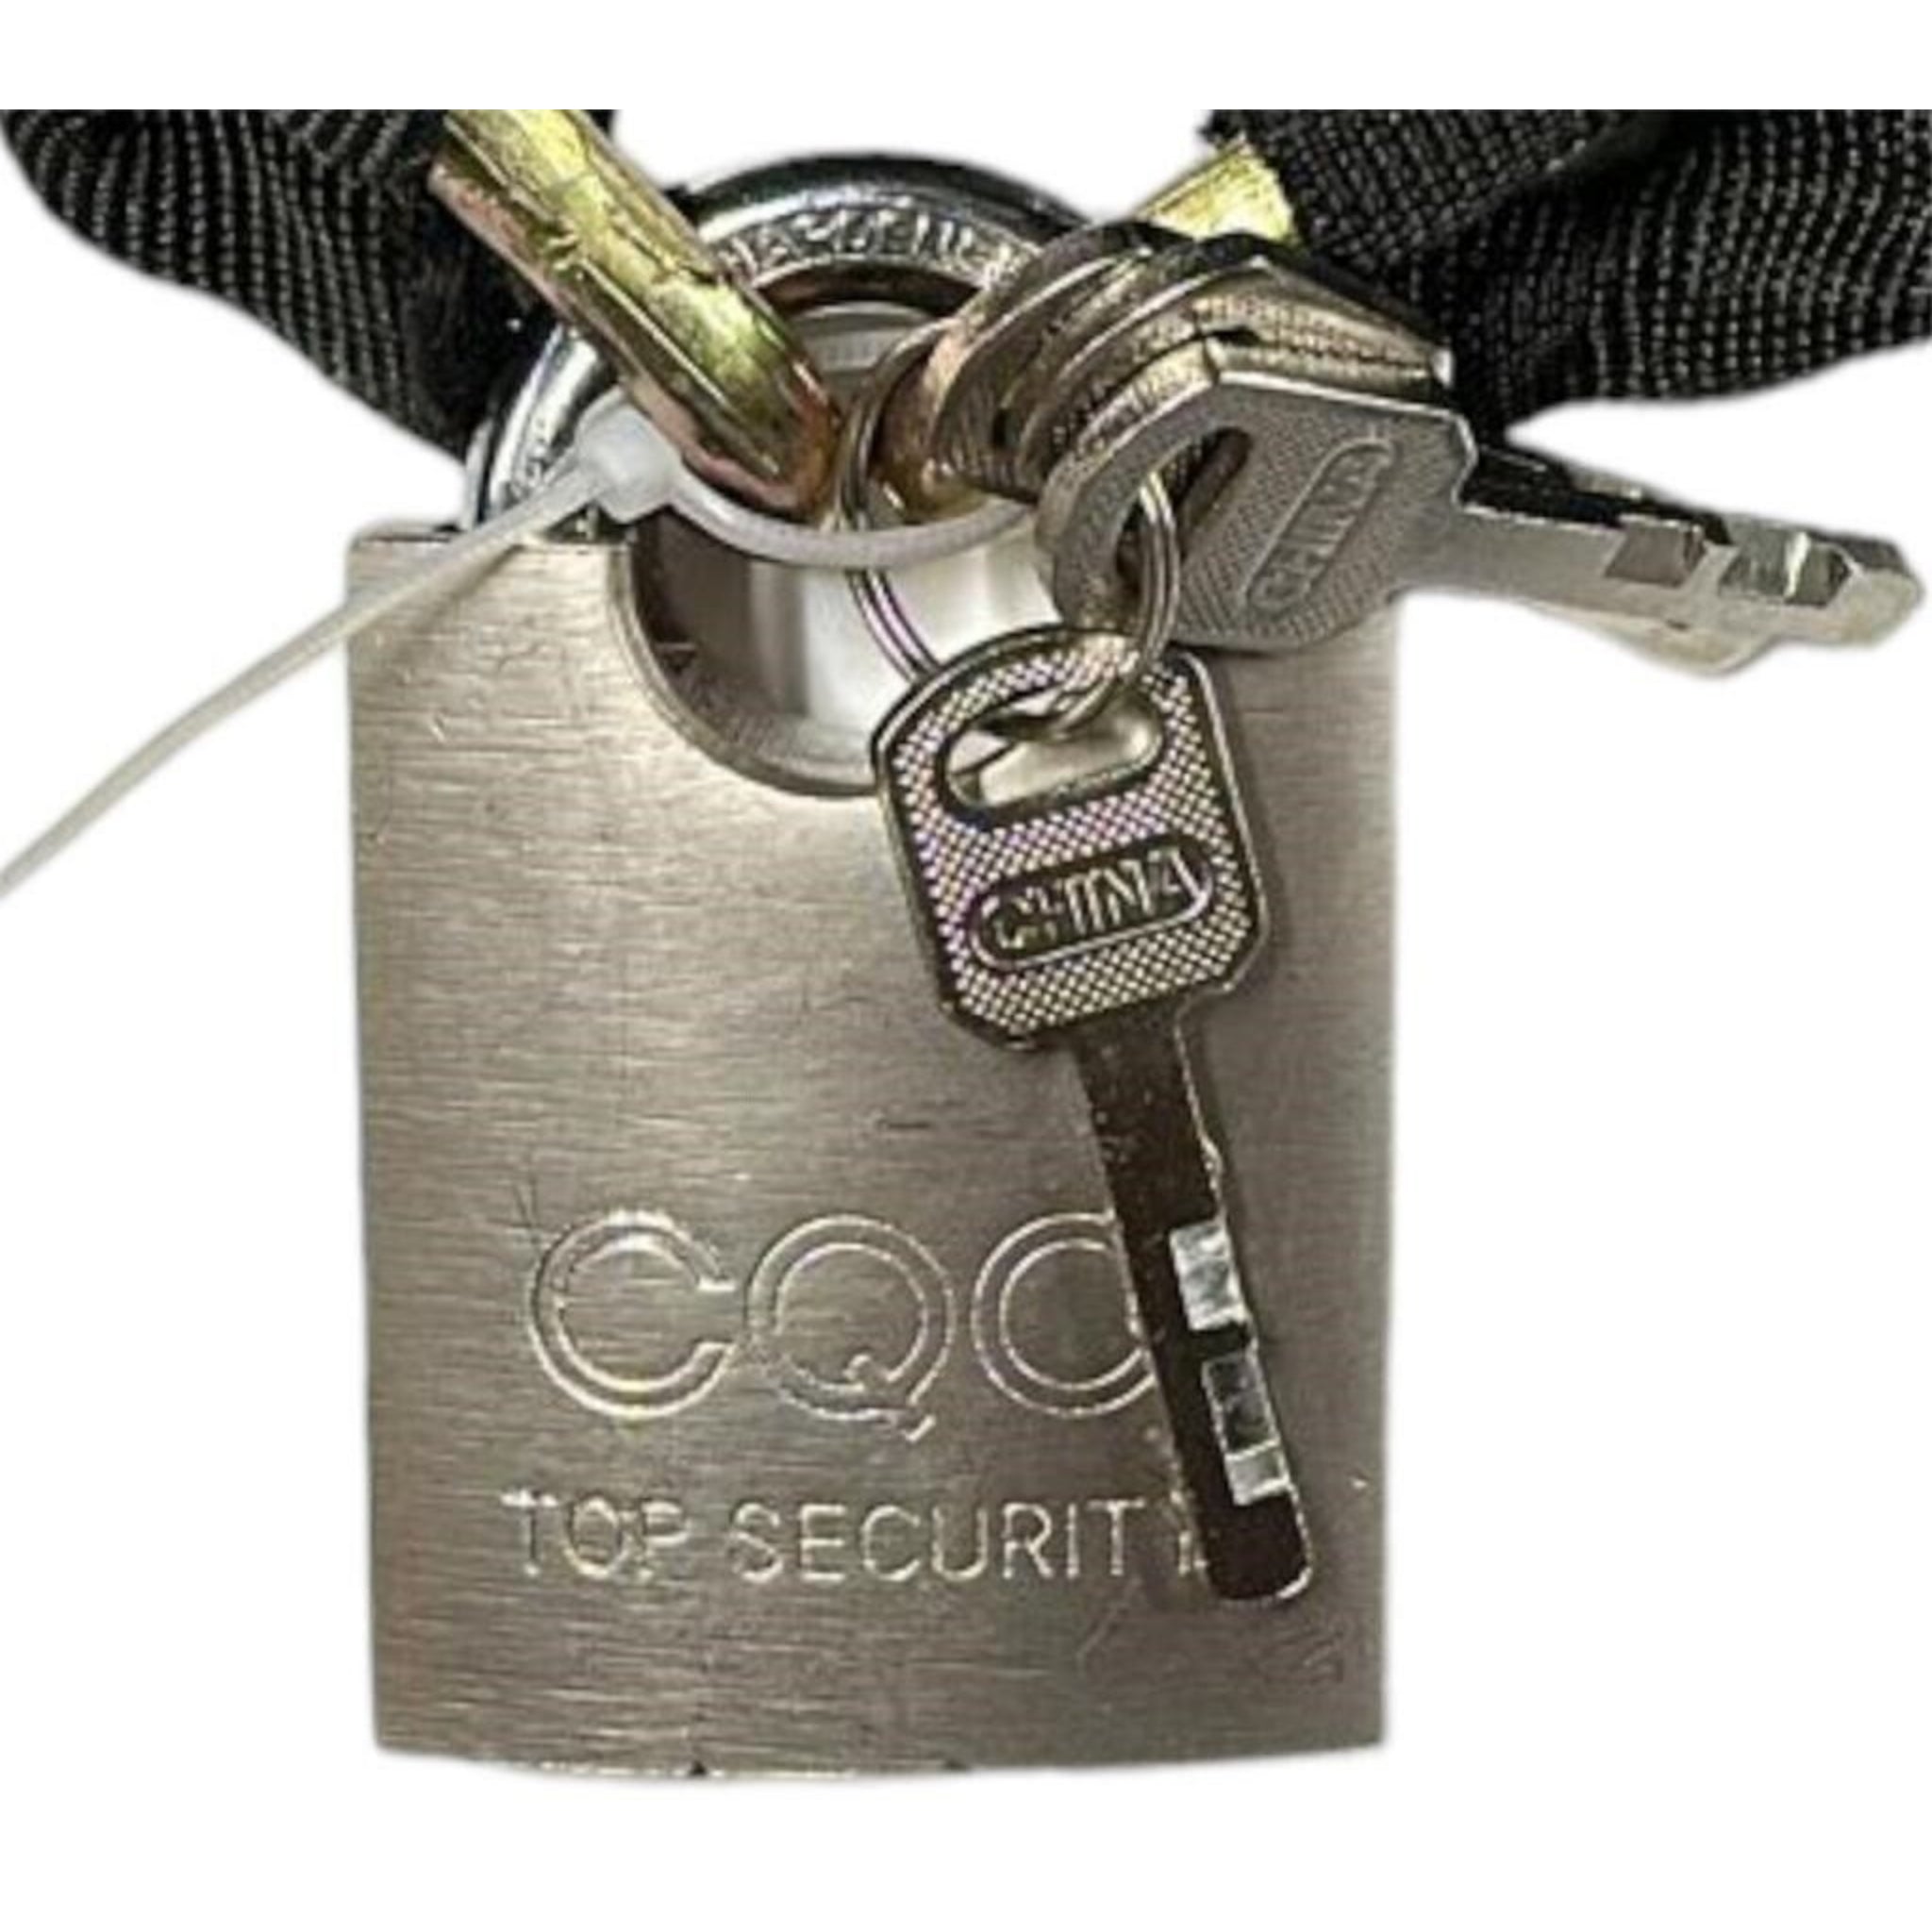 Beclen Harp Anti-Theft Heavy Duty Strong Motorcycle/Motobike/Cycle/Scooter Security Chain And Padlock Lock